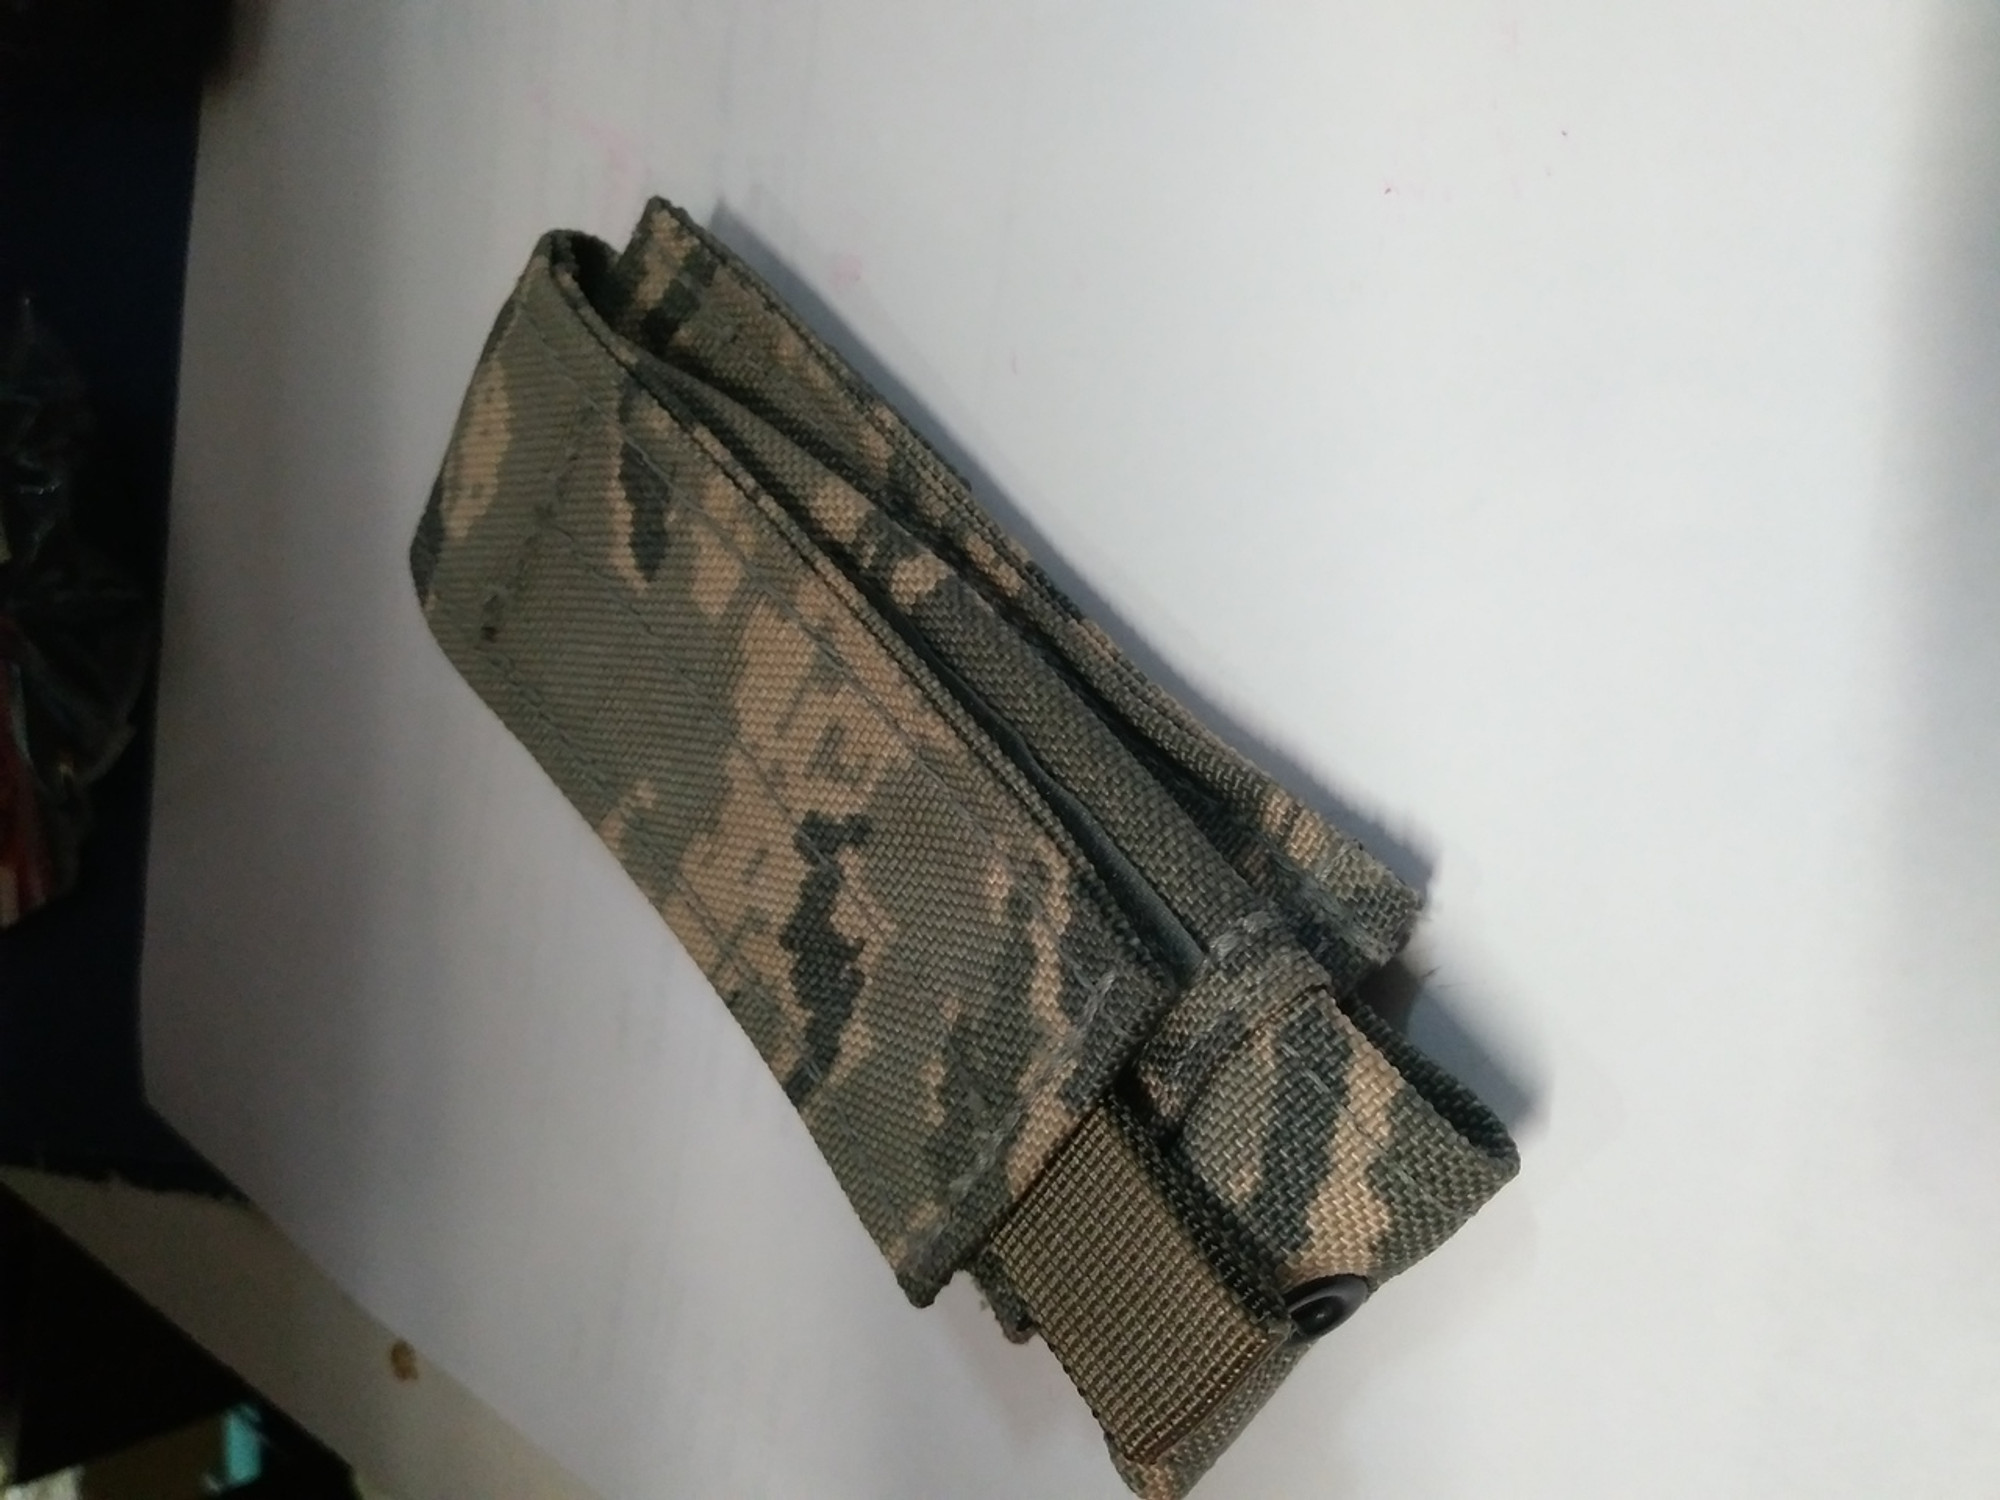 U.S. Armed Forces Molle Tool Pouch (ABU)